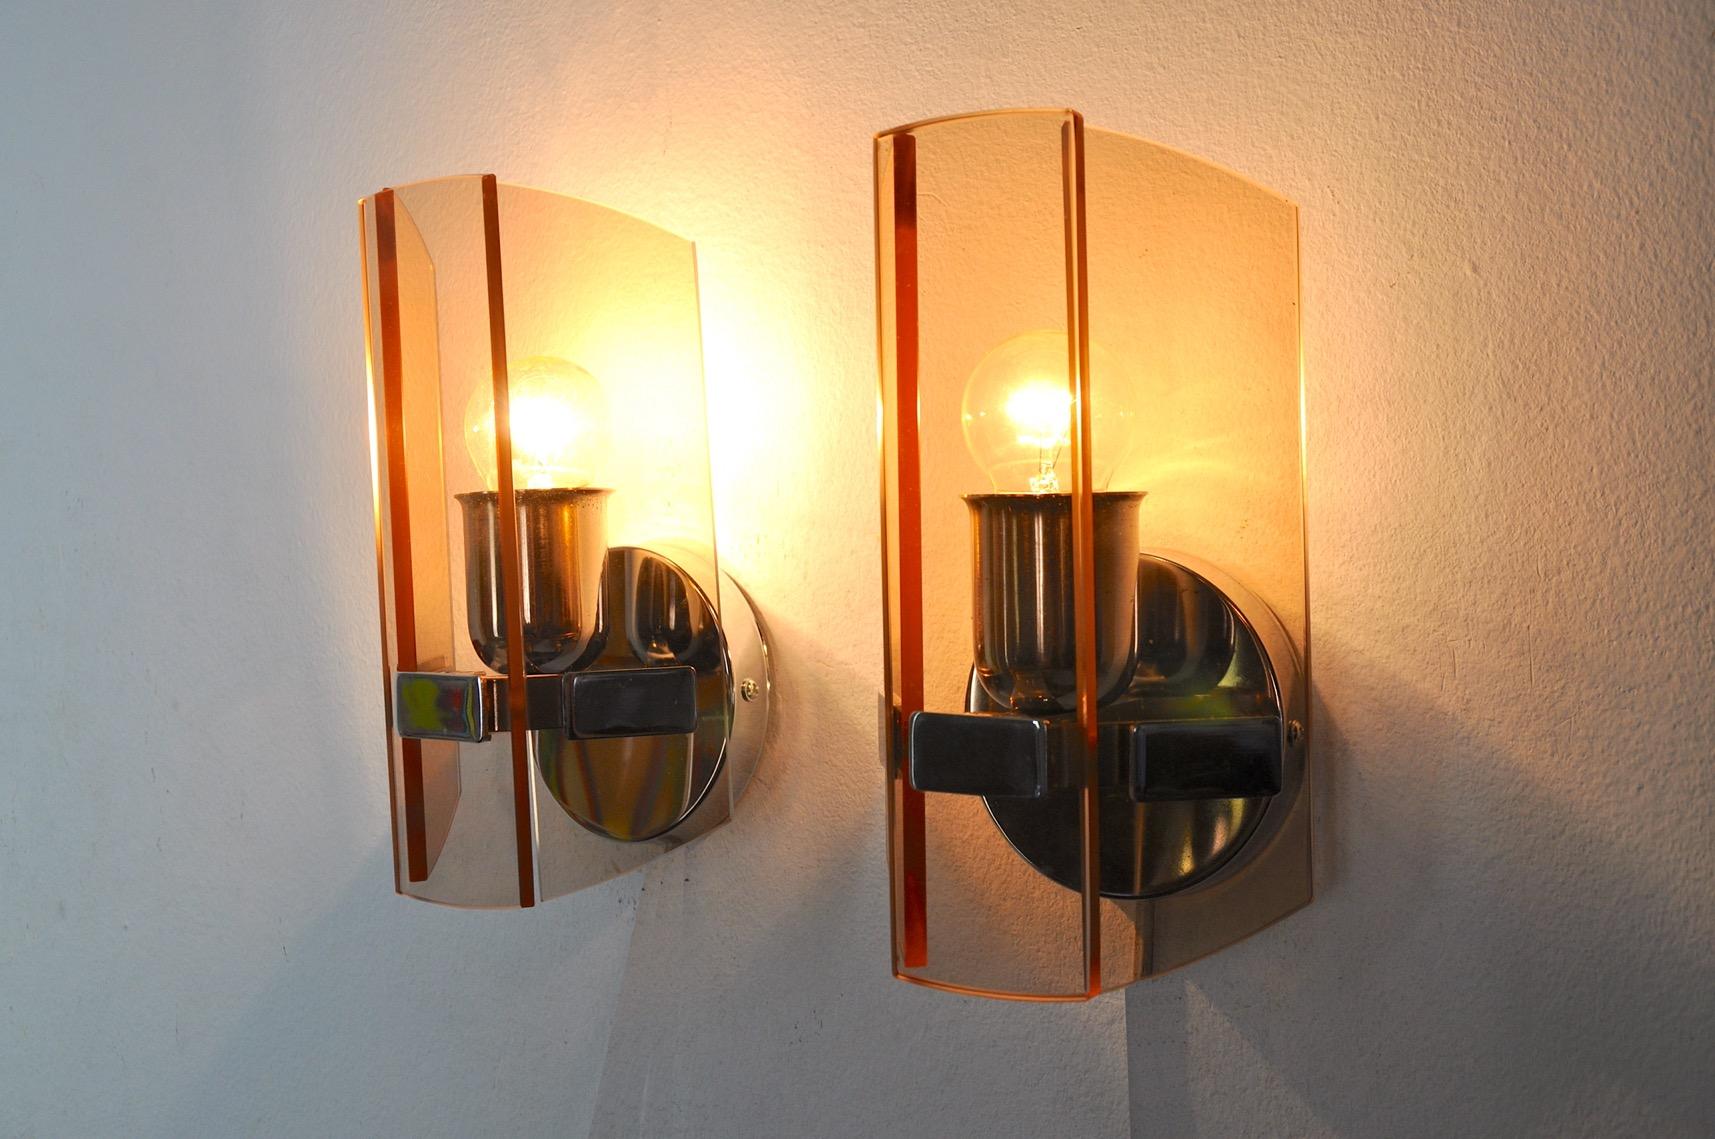 Very nice pair of veca wall lamps produced in italy in the 70s.

Wall lamps composed of pink cut glass plates and a chrome structure.

Unique object that will illuminate wonderfully and bring a real design touch to your interior.

Verified